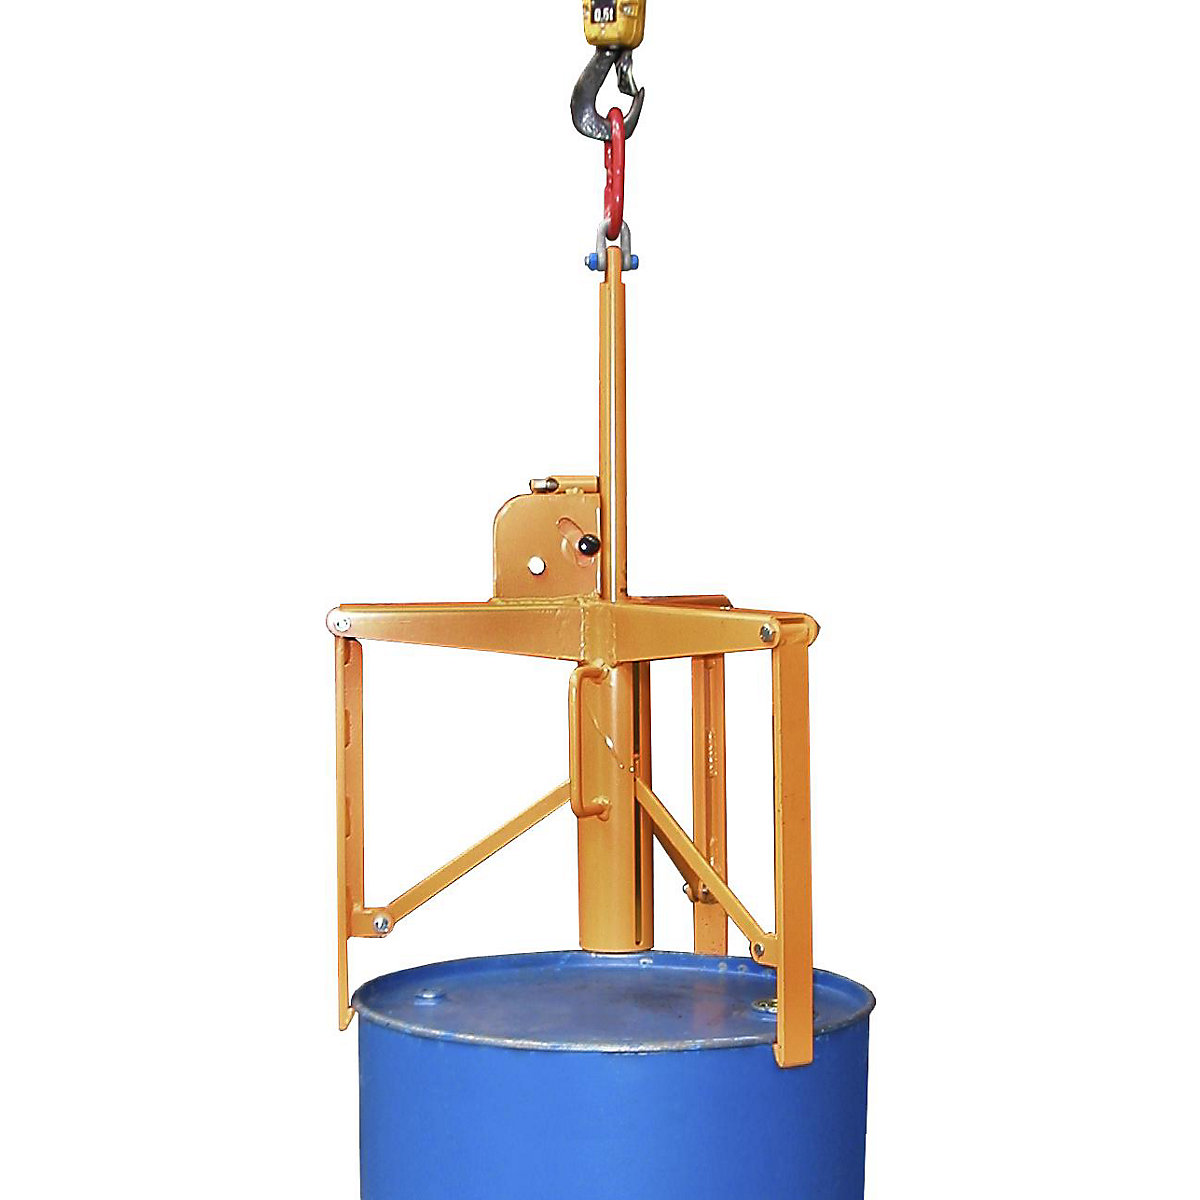 Drum gripper with 3-point clamping system - eurokraft pro